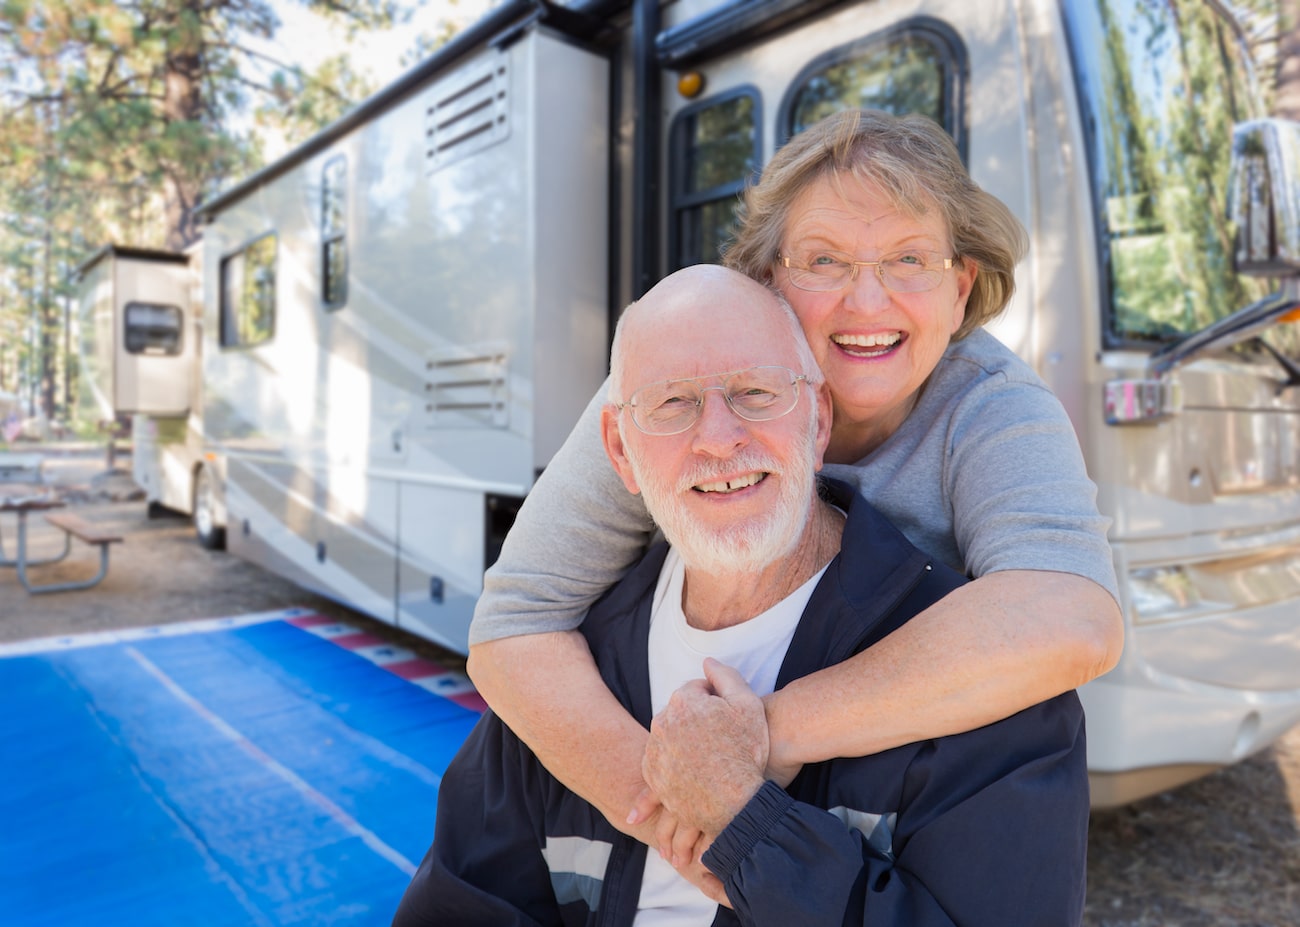 Smiling couple in front of recreational vehicle